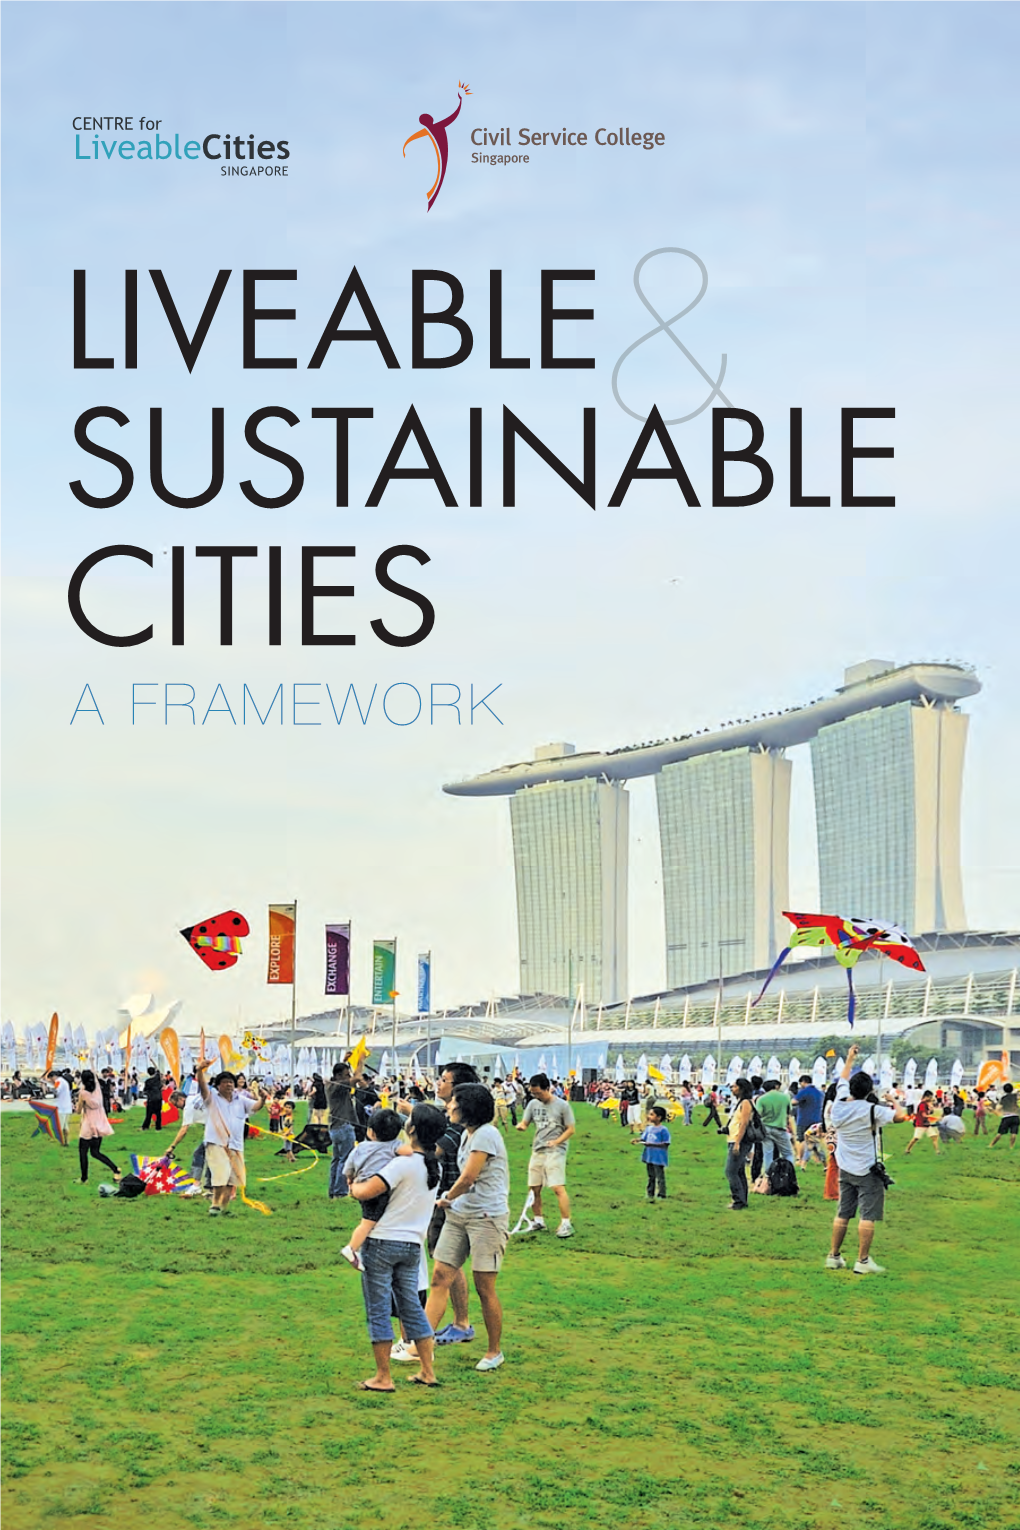 Liveable and Sustainable Cities: a Framework” Is an Attempt to Share with the Rest of the World Four Key Pieces of Singapore’S Urbanisation Story